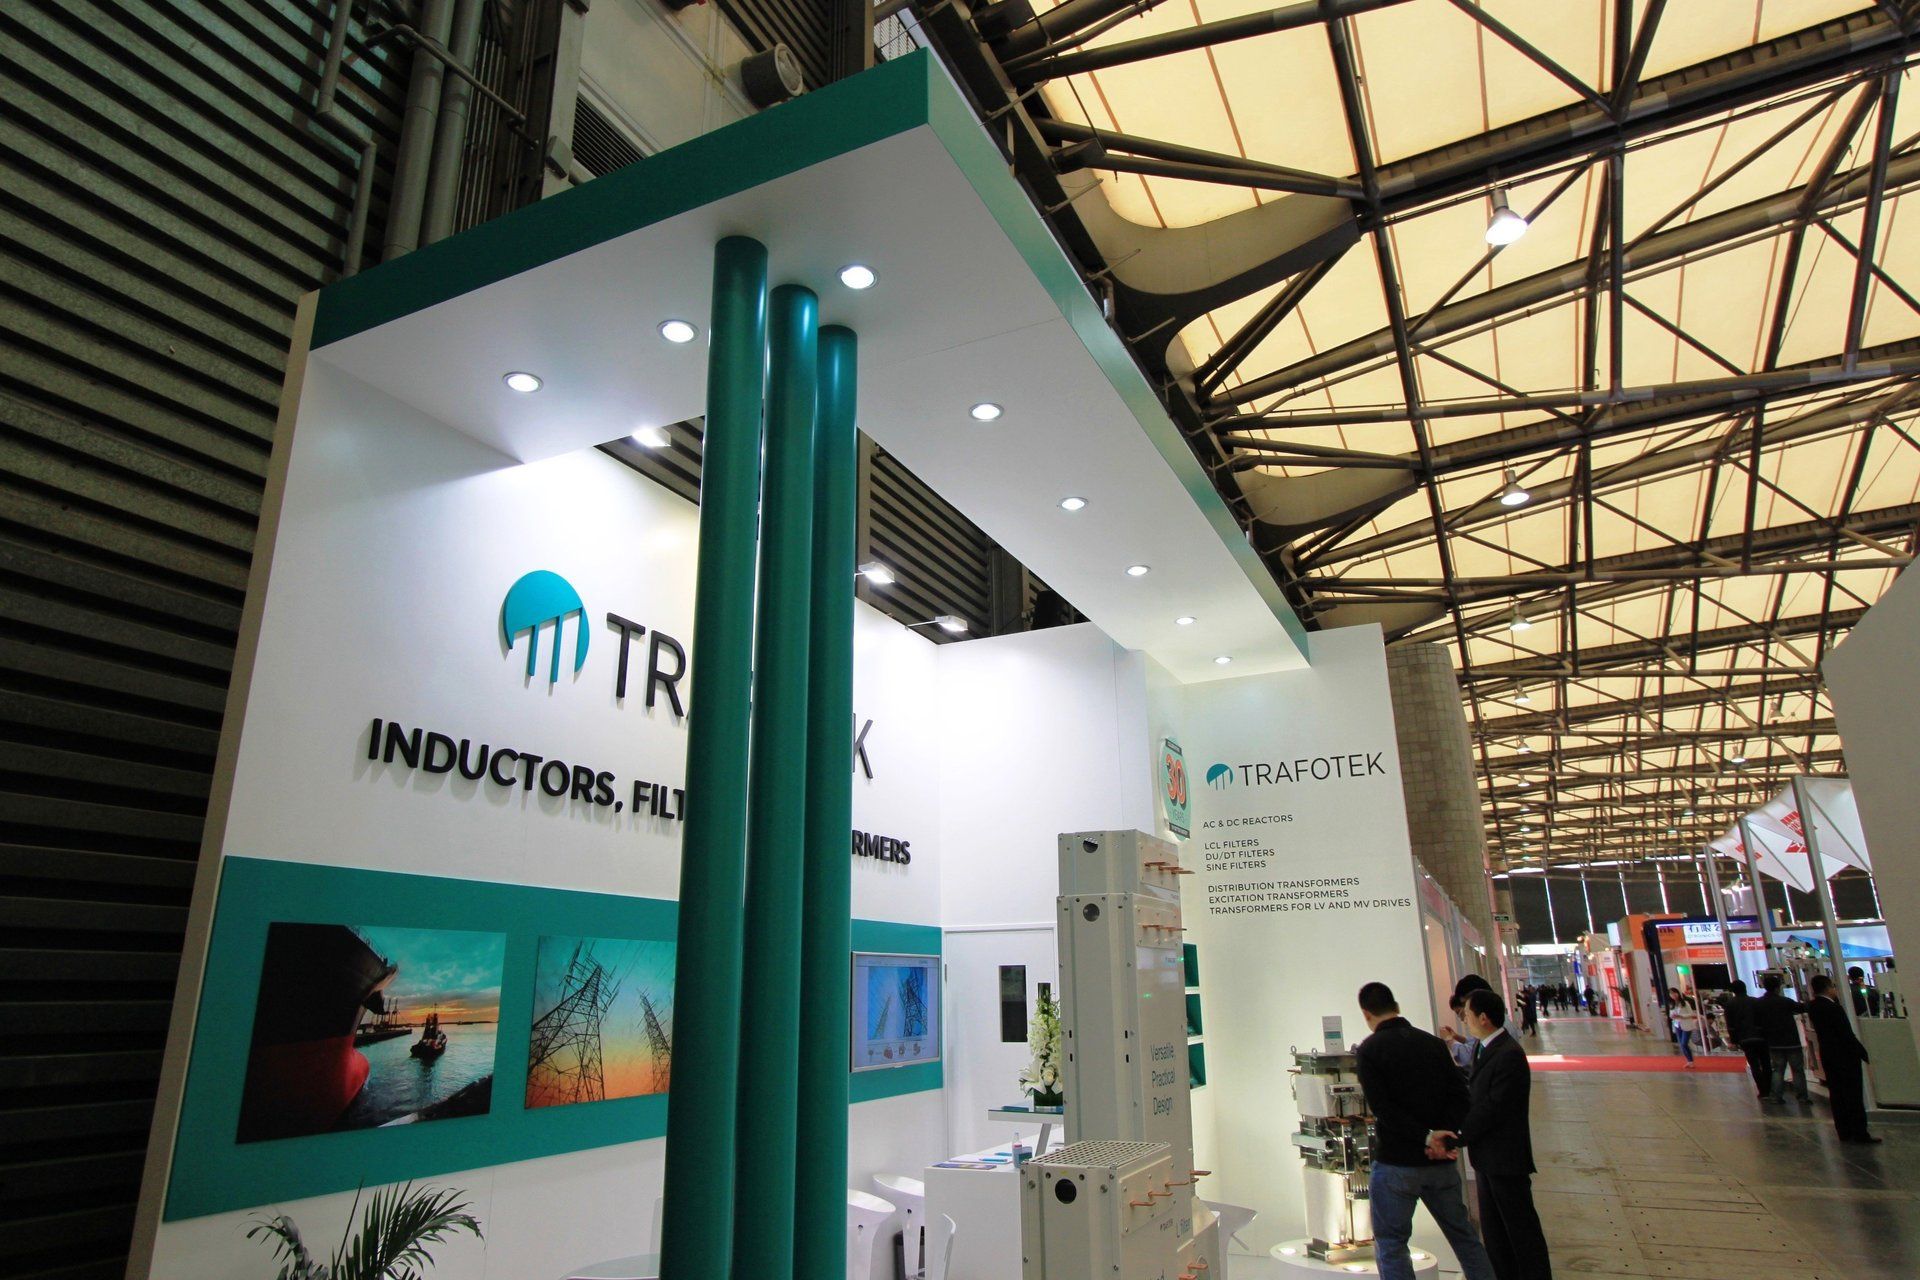 Trafotek @ China International Industry Fair 2013. Booth designed and built by Essential Global Fairs.